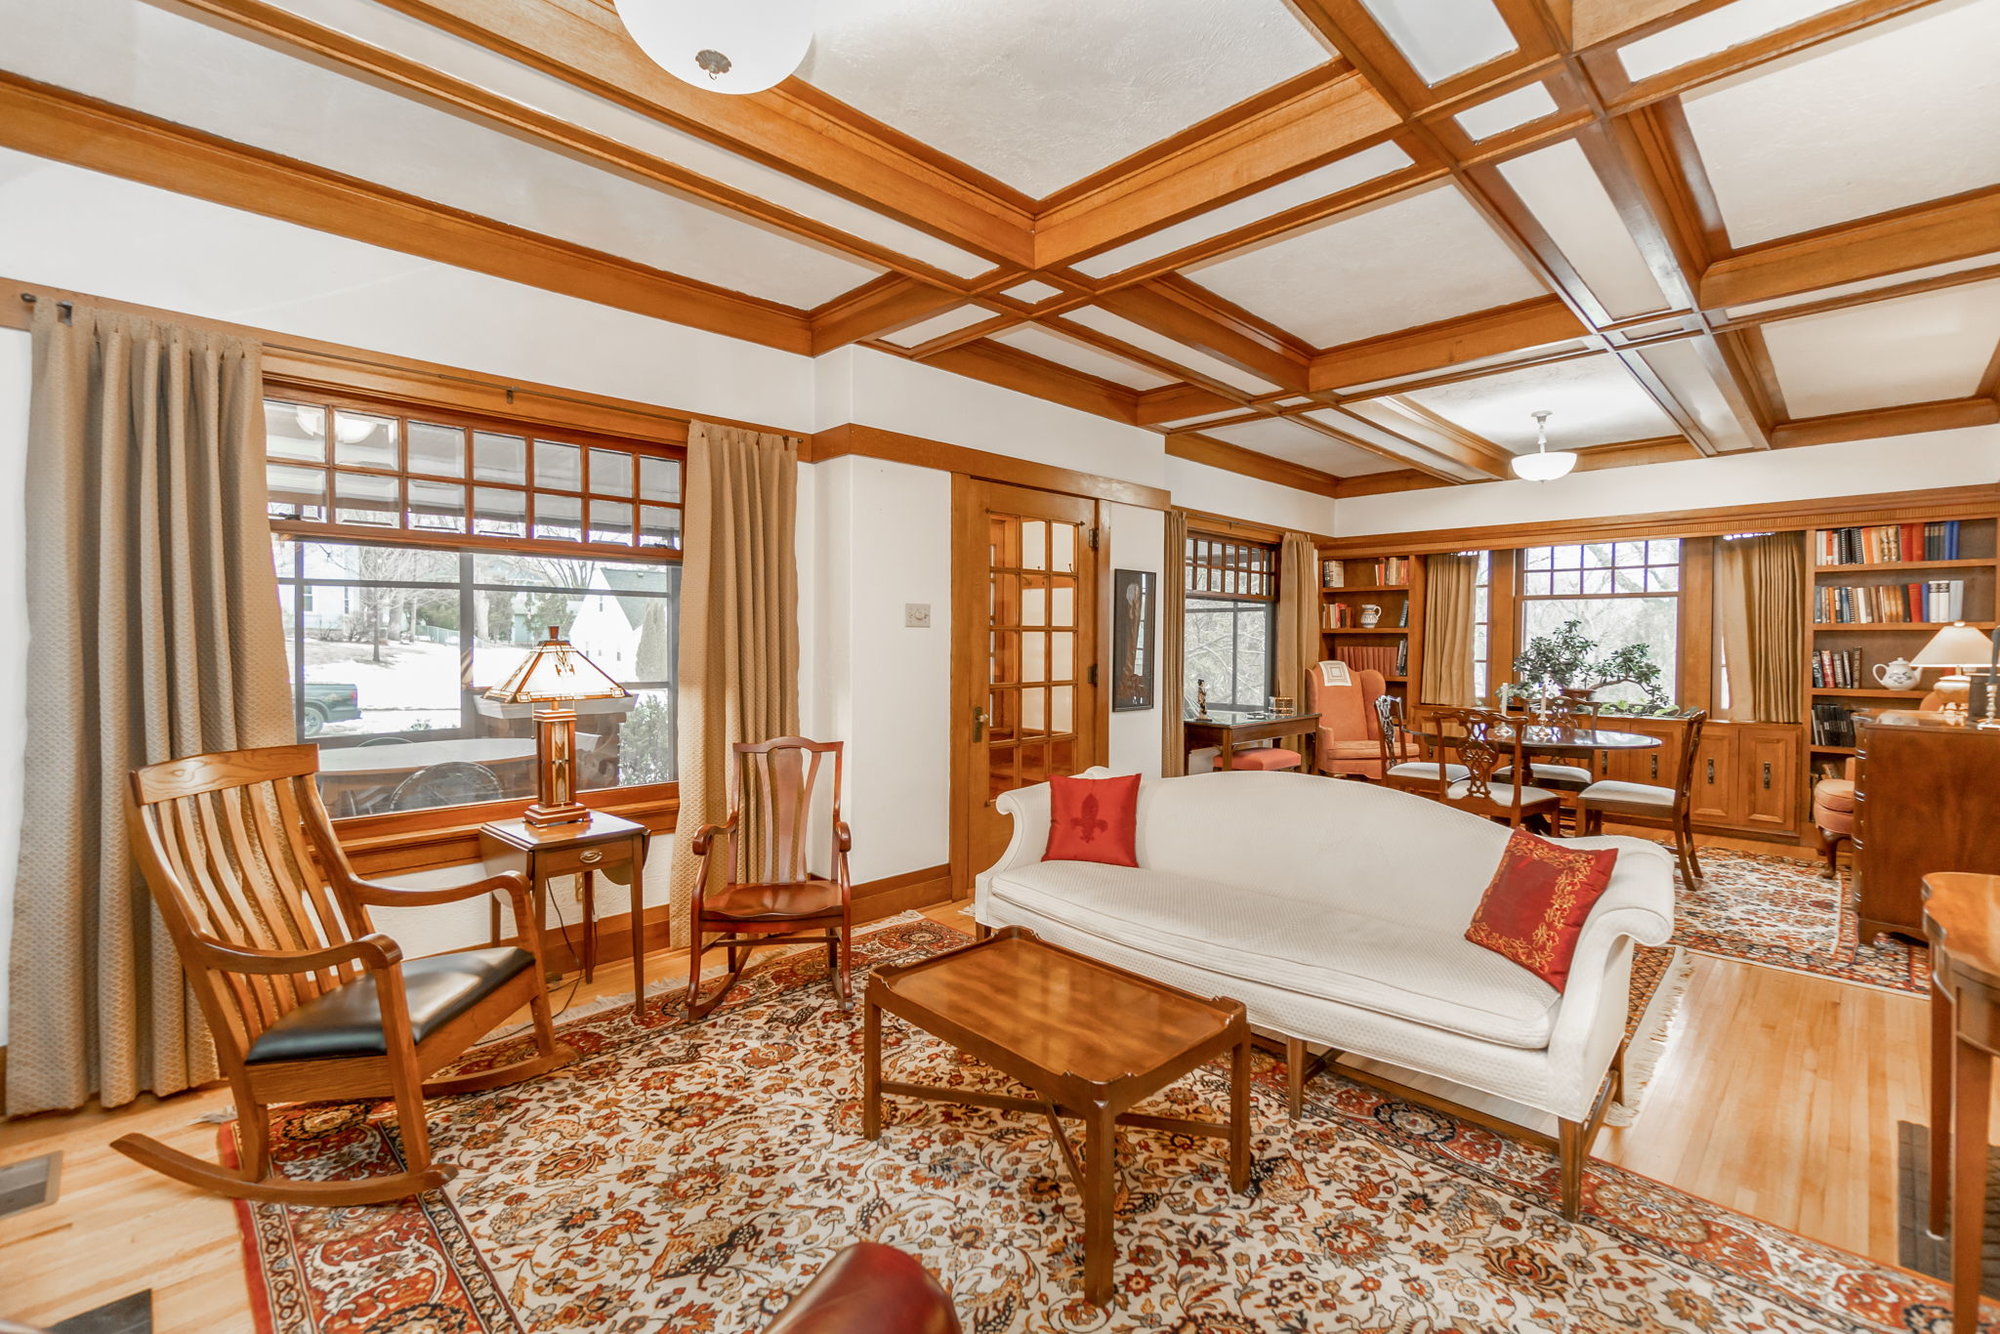 2023 listing of the month recap - the craftsman bungalow